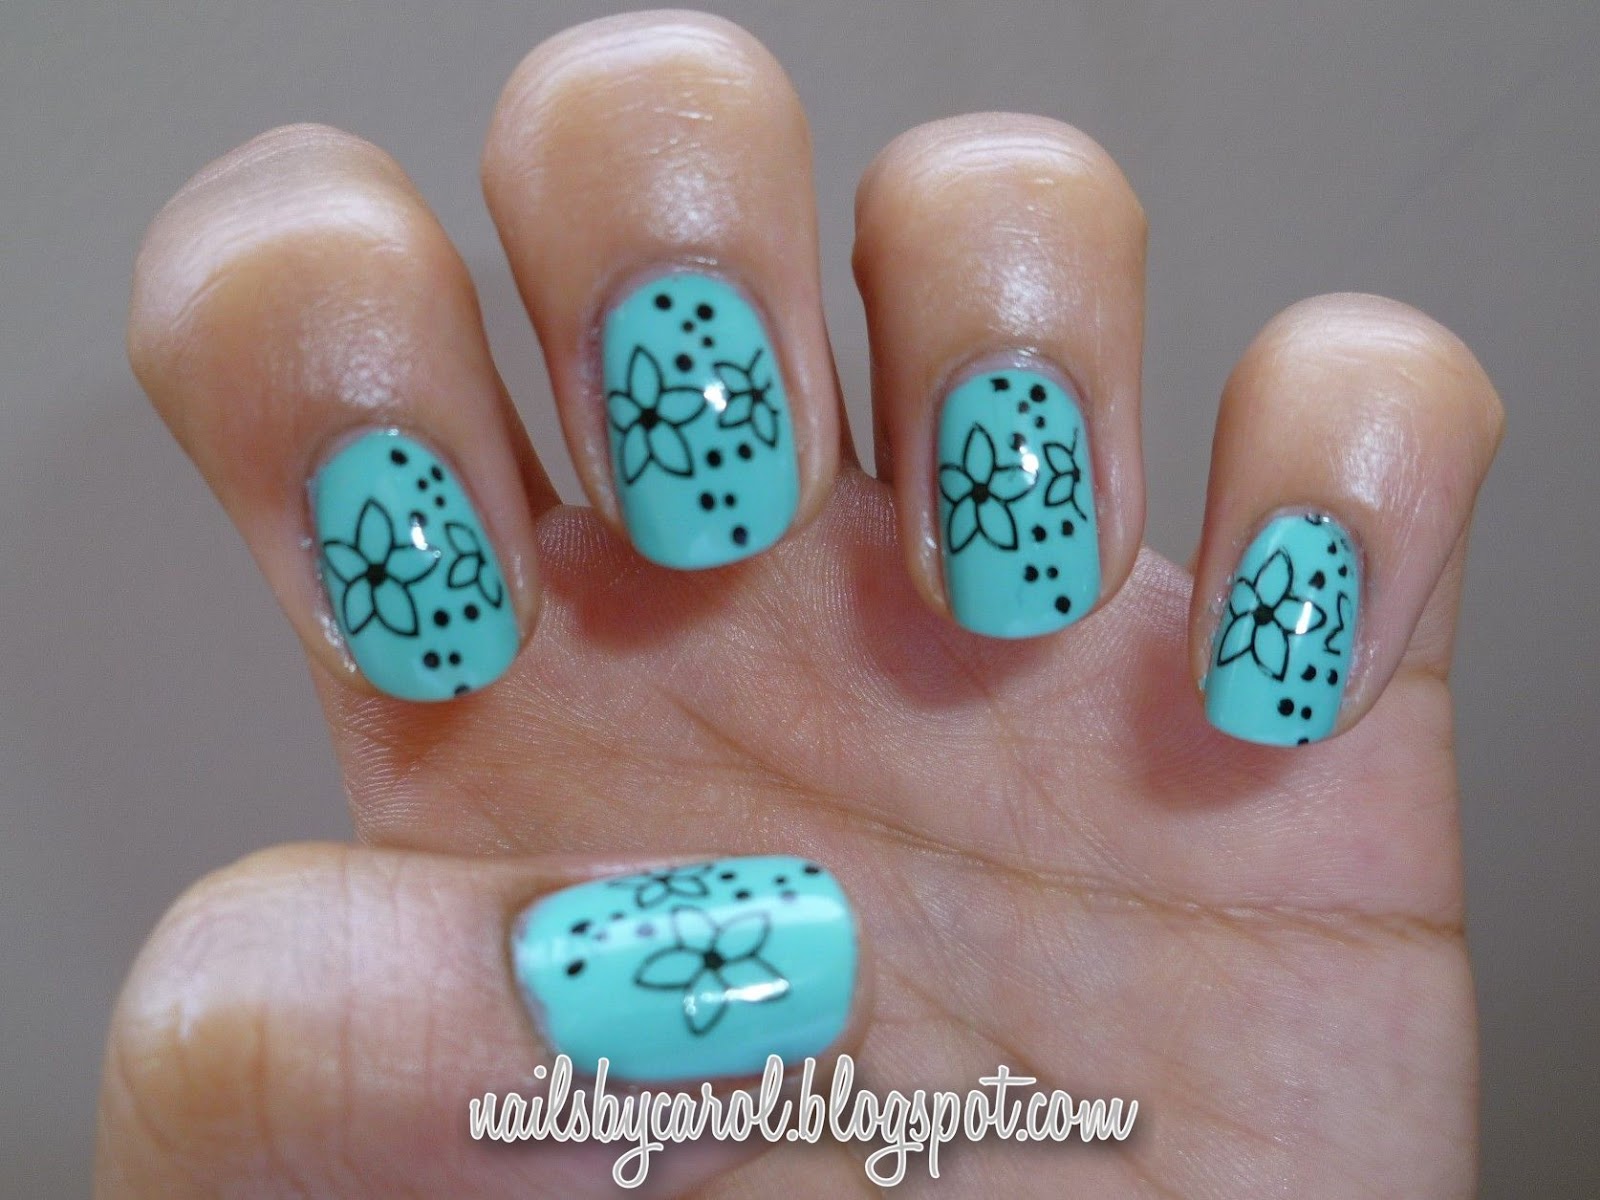 Nails by Carol: Review for KK CenterHK: Stamping Plate, Half Pearls and ...